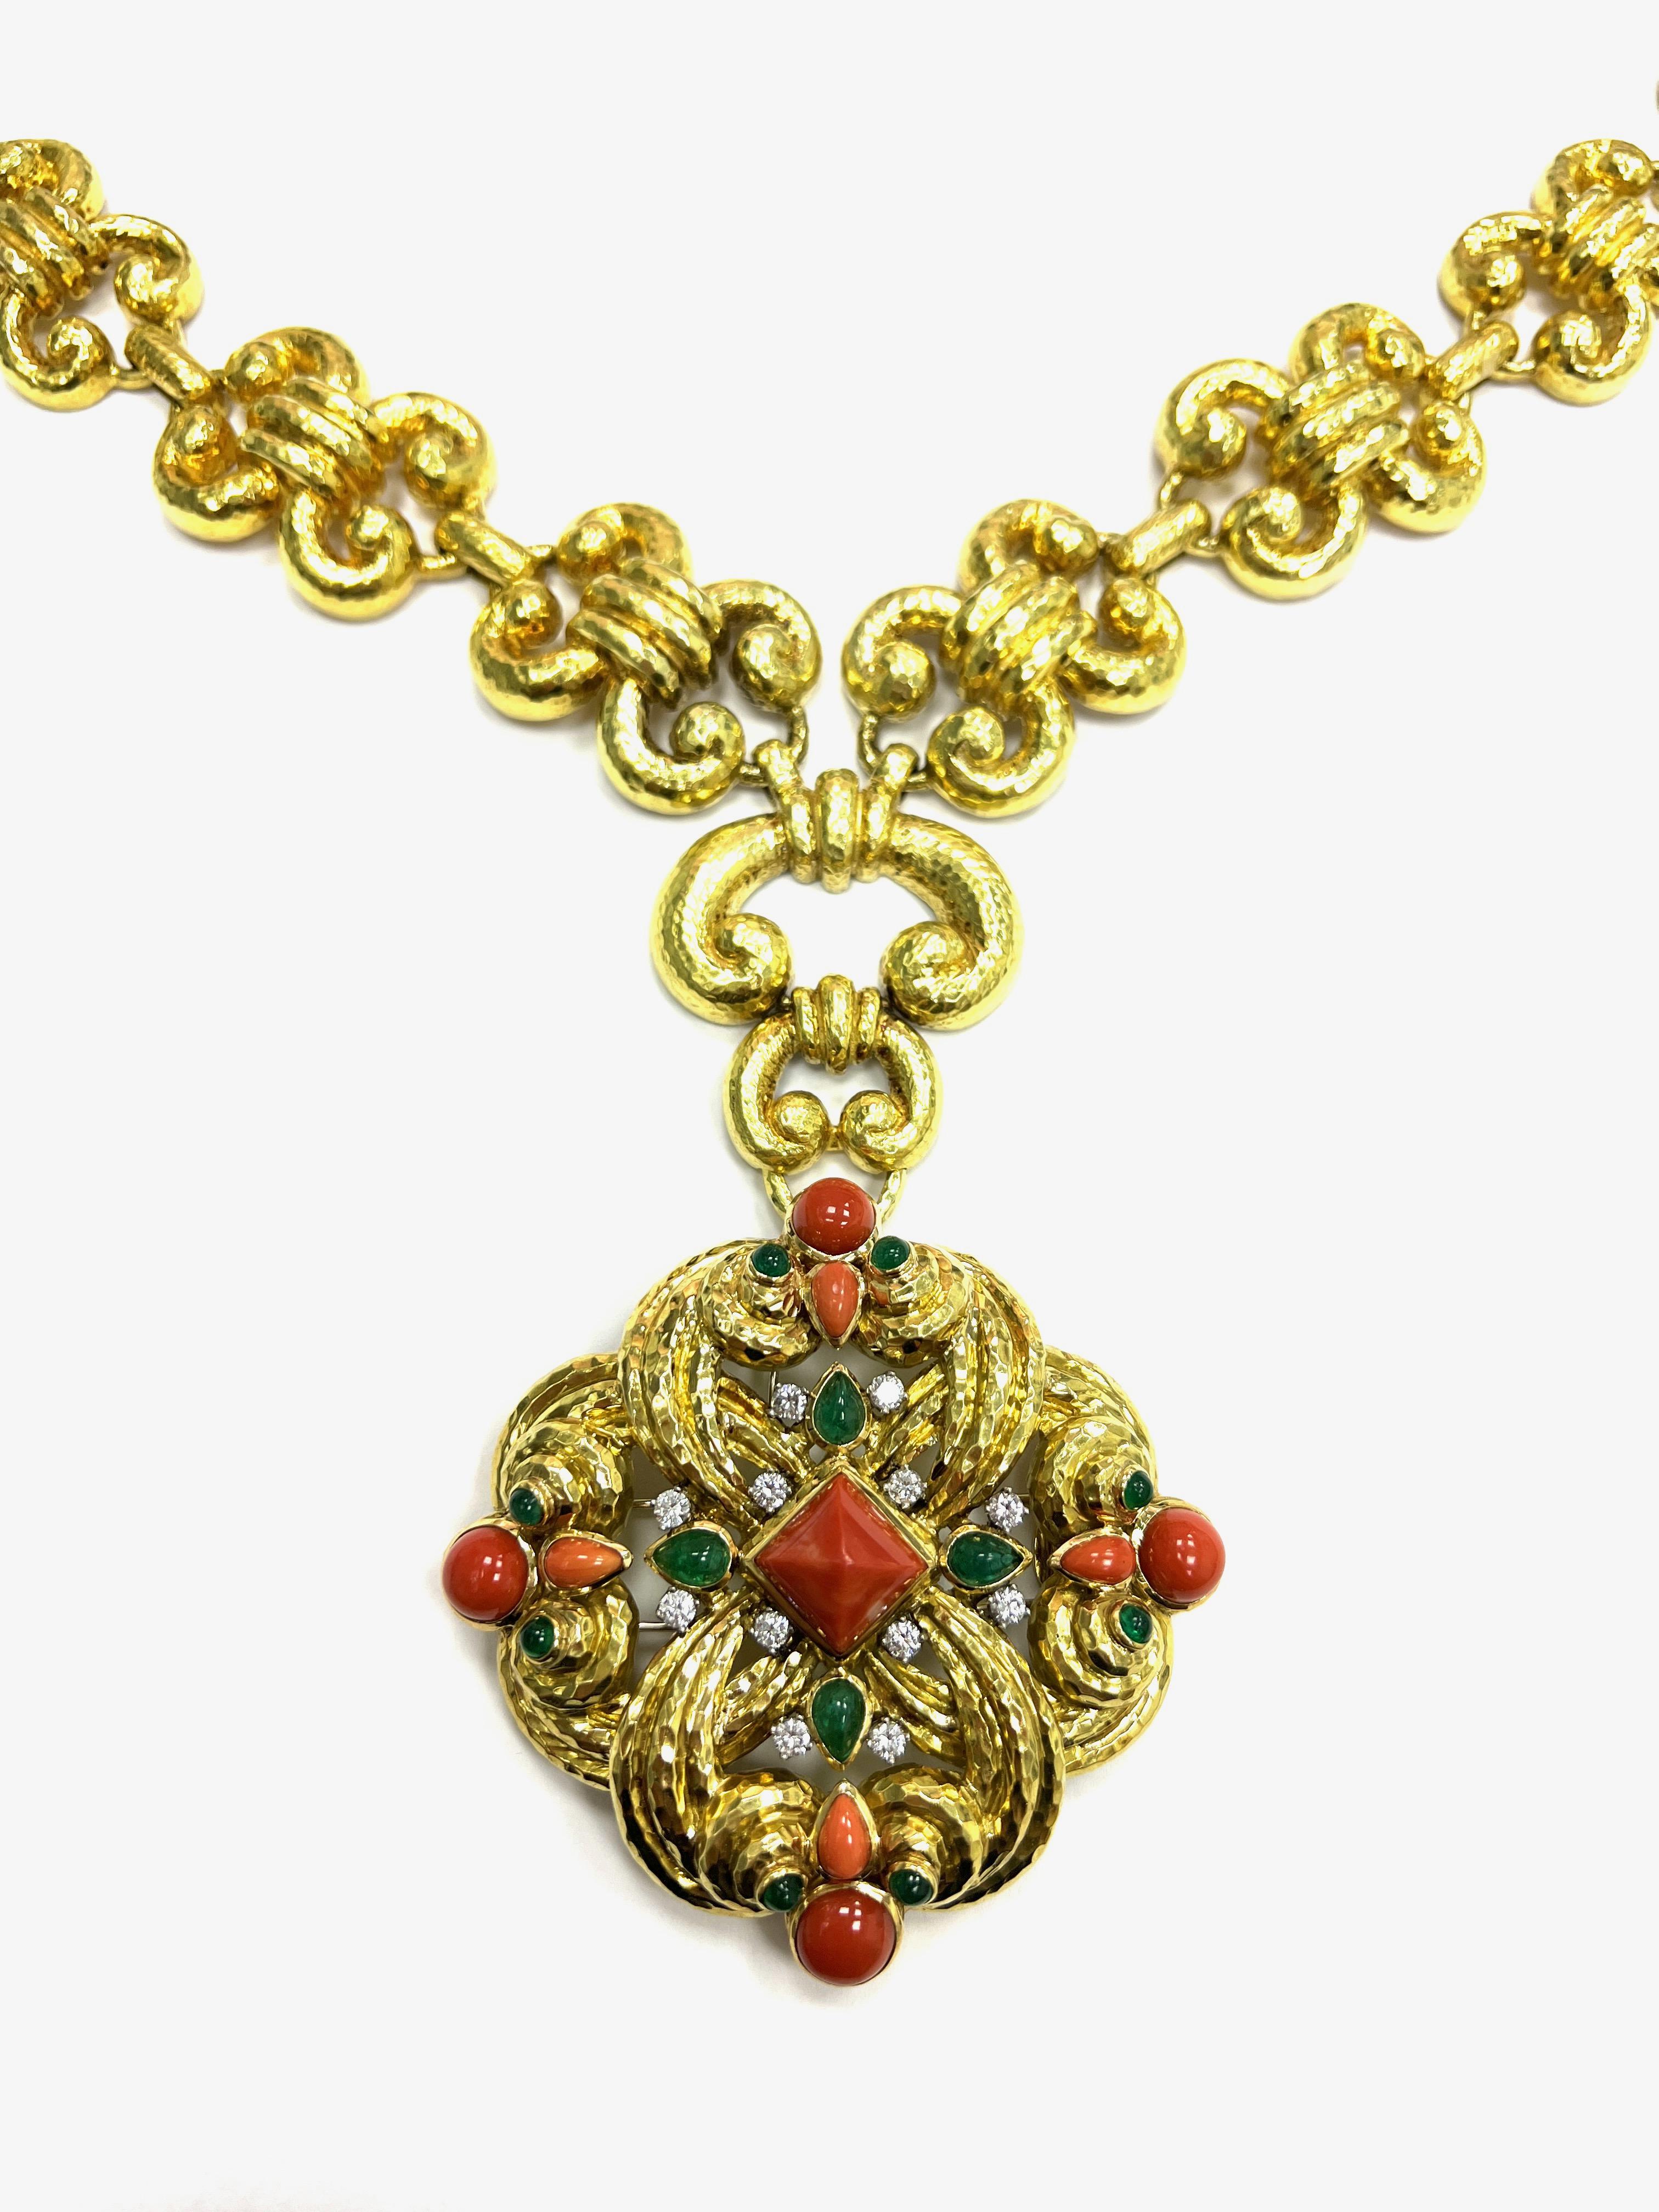 David Webb One of A Kind Coral Emerald 18k Yellow Gold Pendant Brooch  For Sale 6